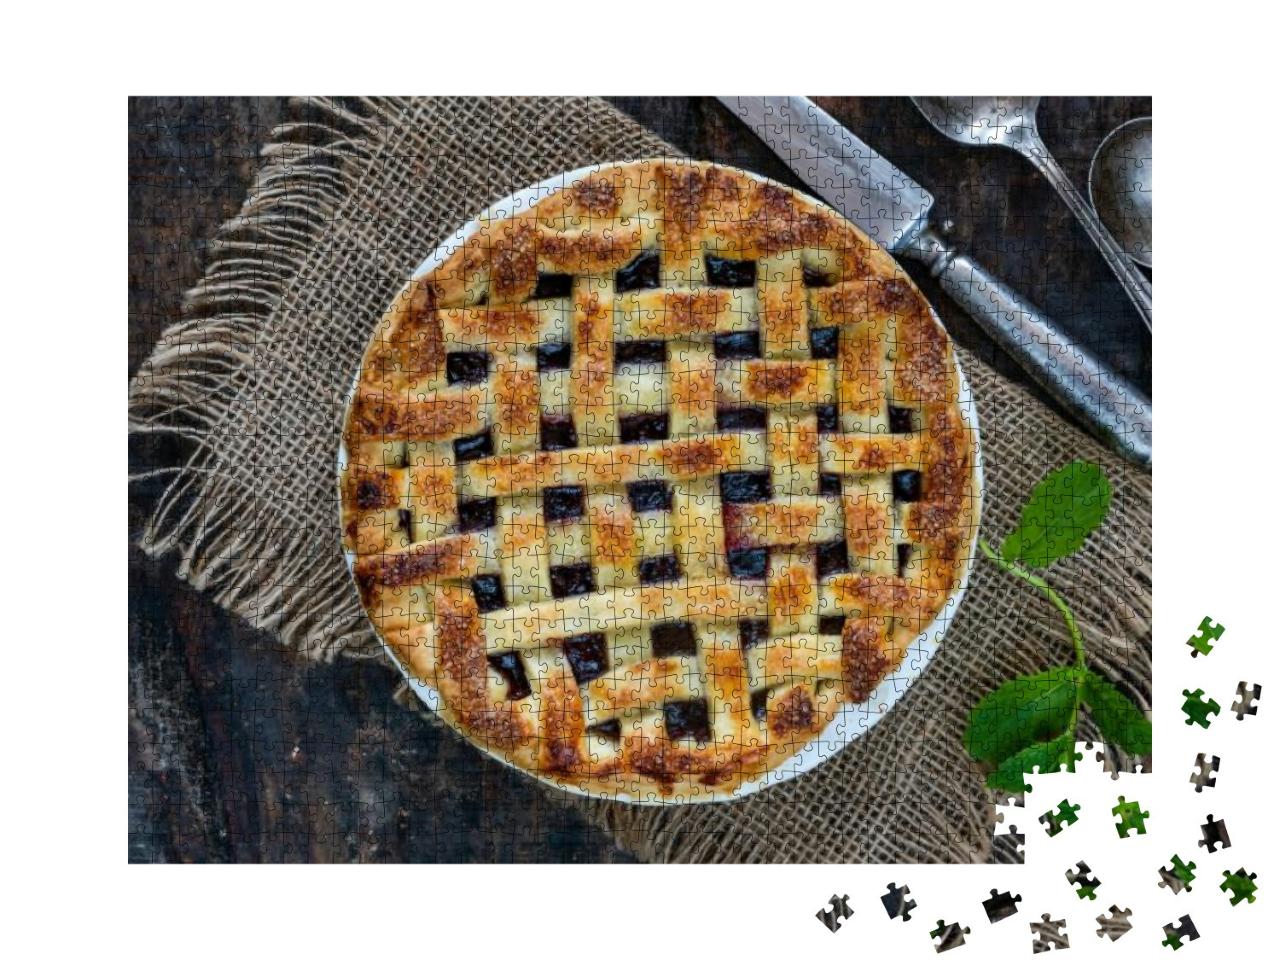 Classic Home Baked Cherry Pie with Lattice Crust... Jigsaw Puzzle with 1000 pieces